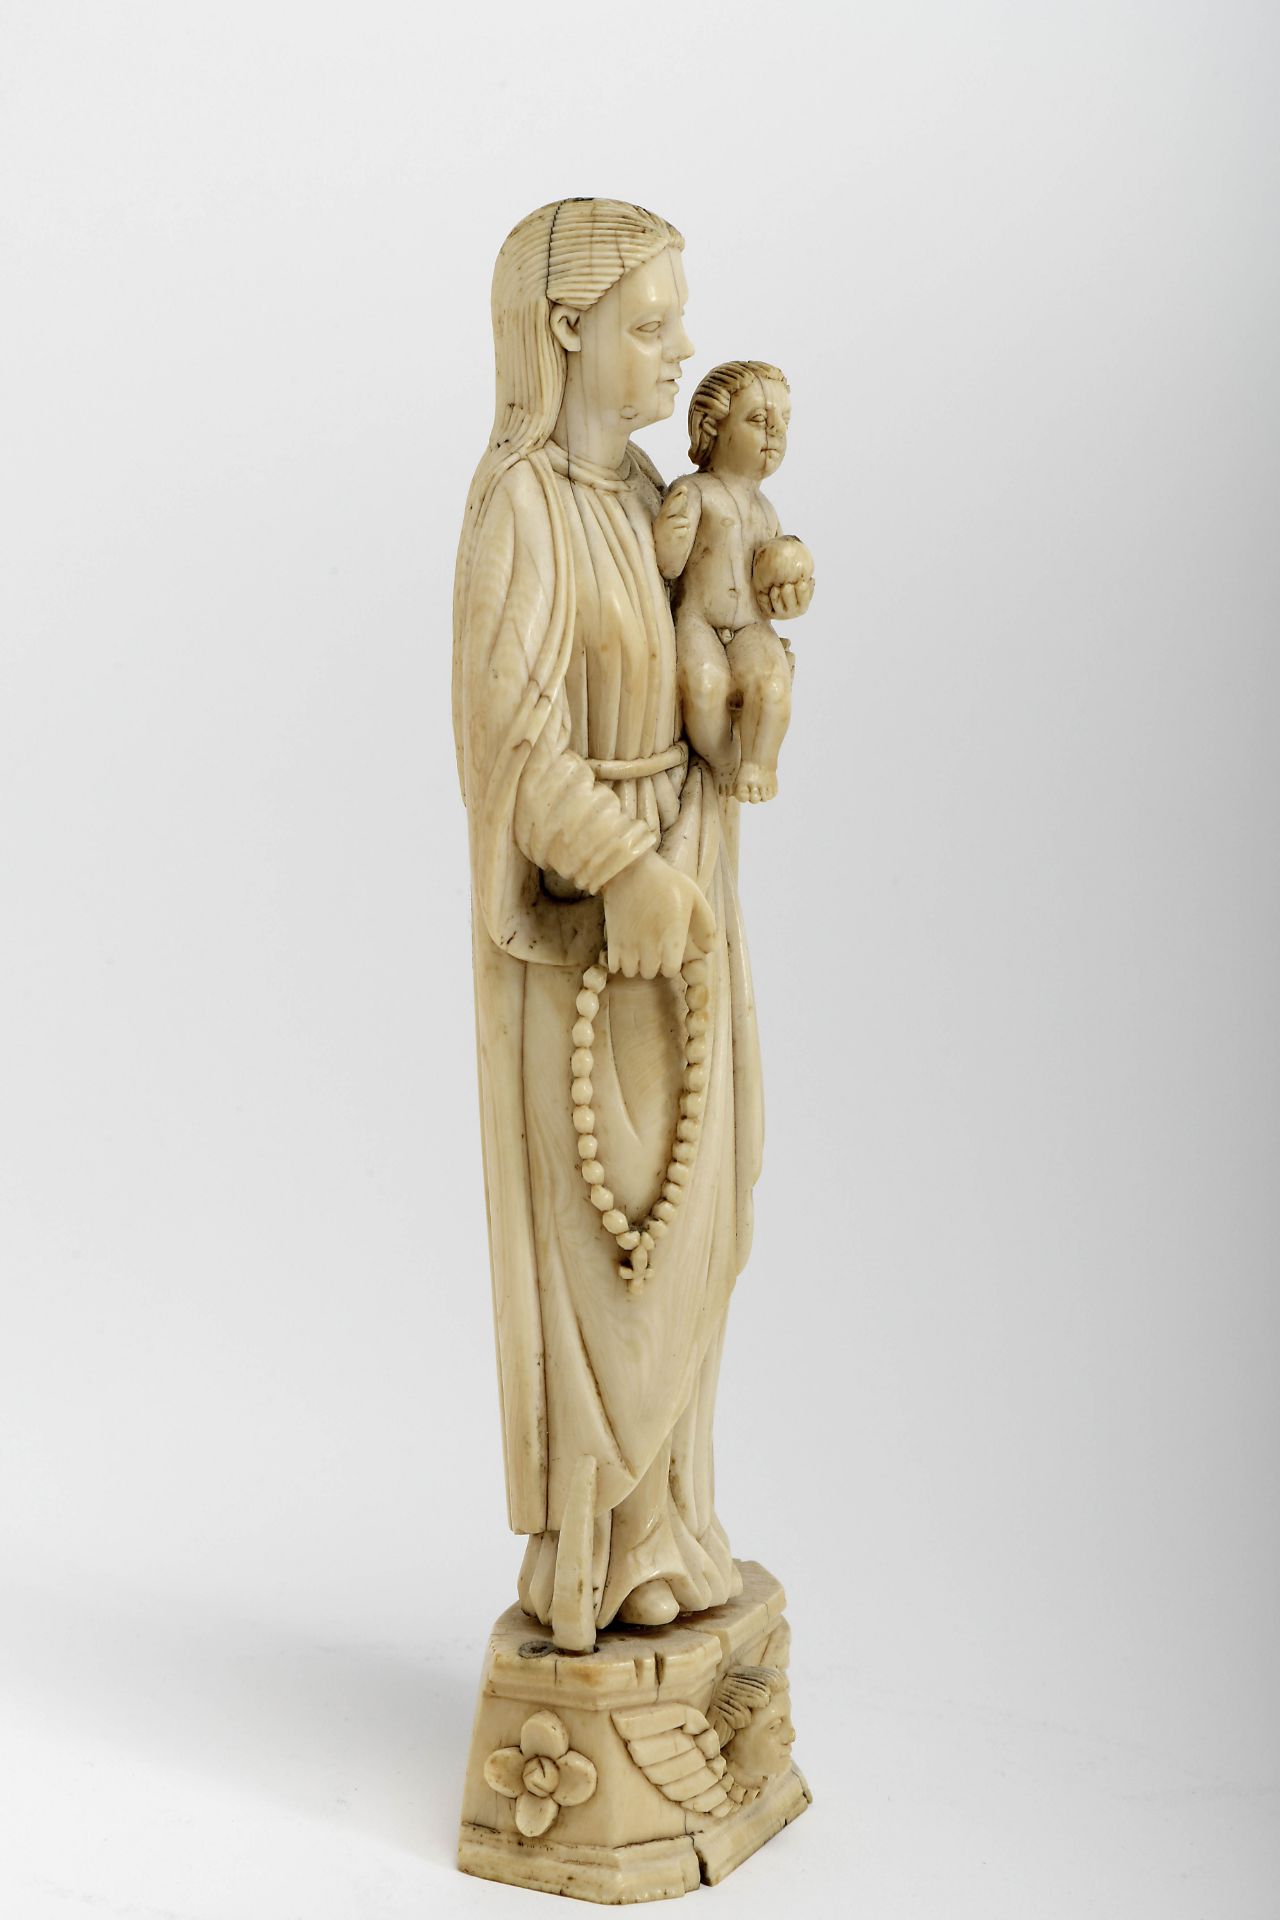 Our Lady of the Rosary with the Child Jesus - Image 3 of 5